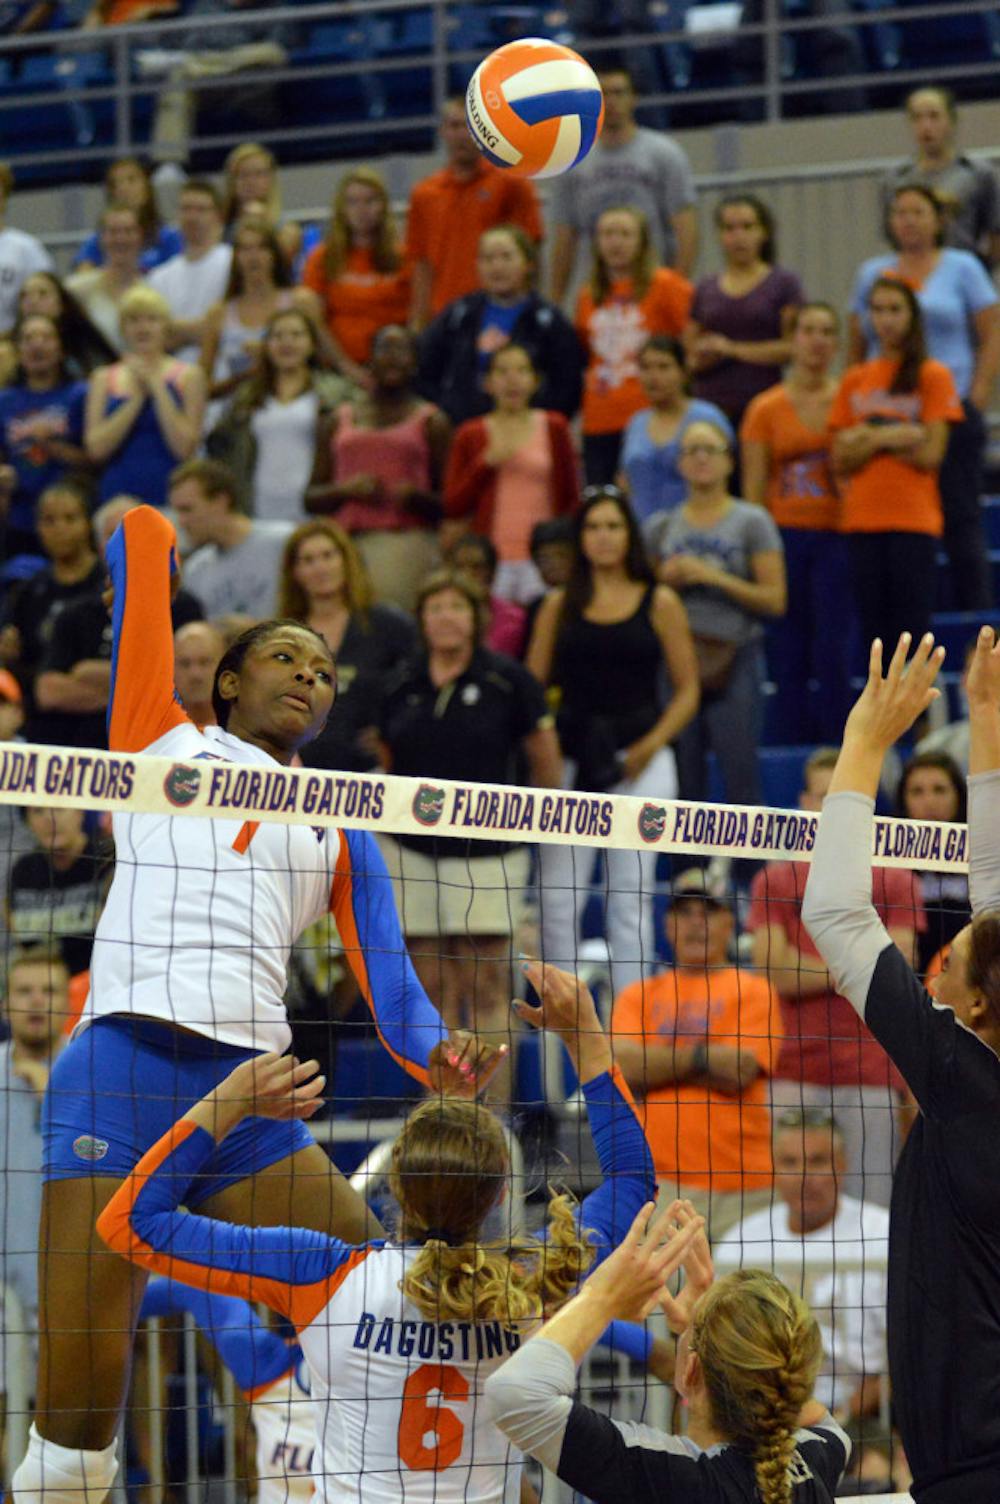 <p class="p1">Freshman middle blocker Rhamat Alhassan swings for a kill during Florida's 3-0 win against Idaho on Aug. 29 in the O'Connell Center.</p>